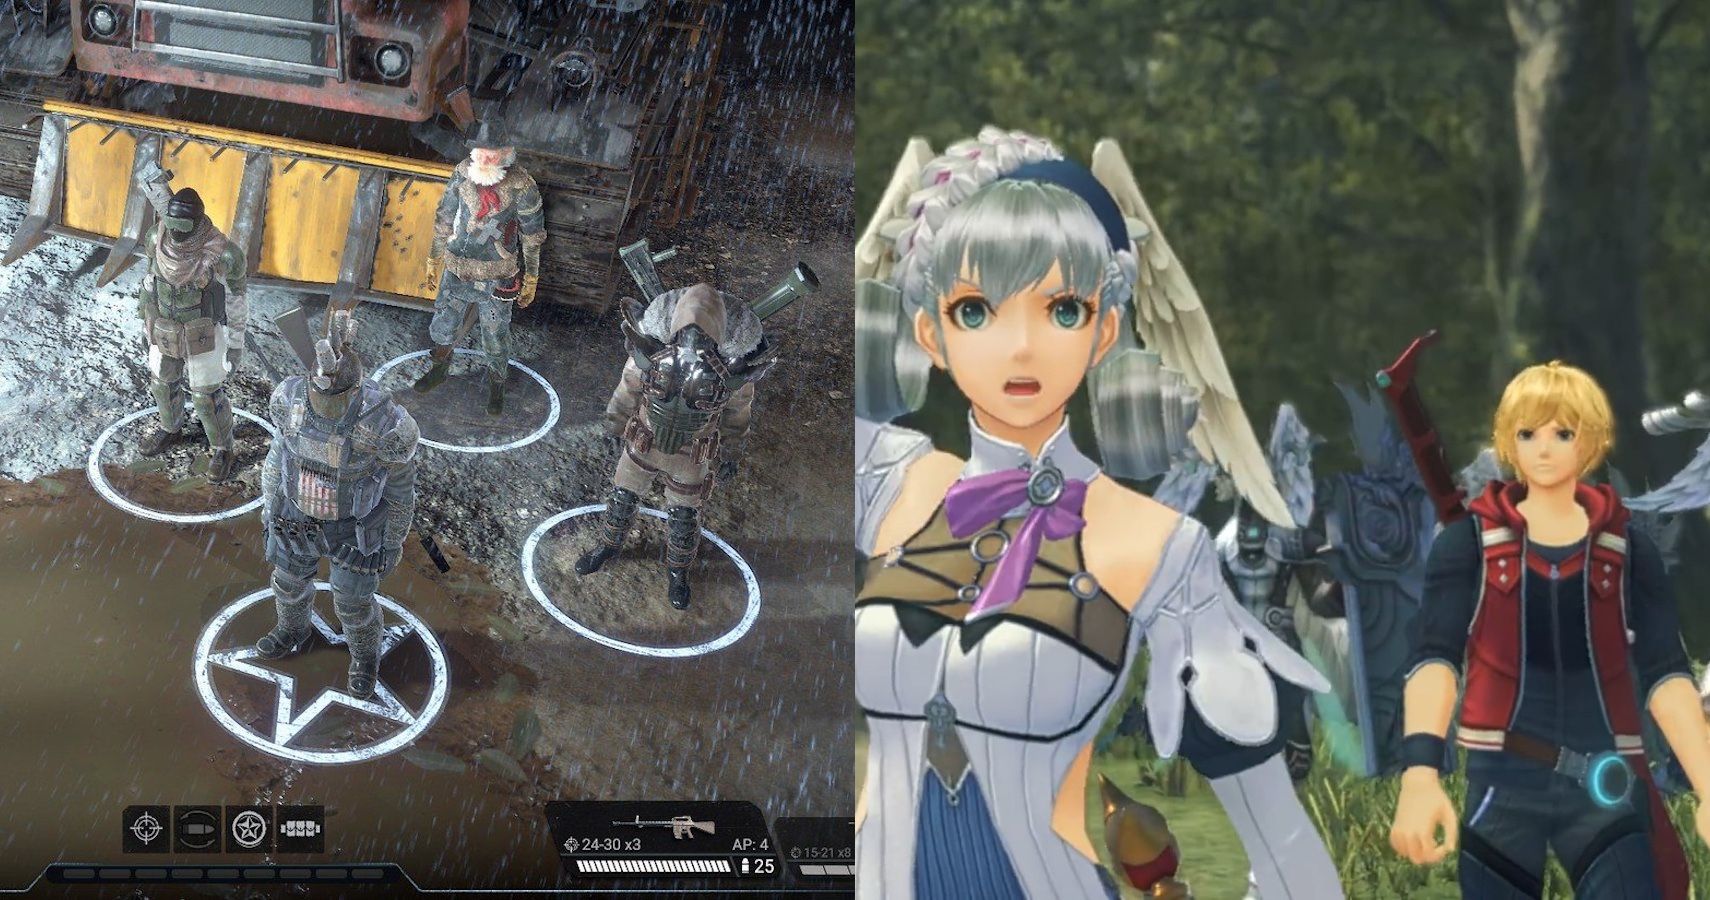 wasteland and xenoblade chronicles